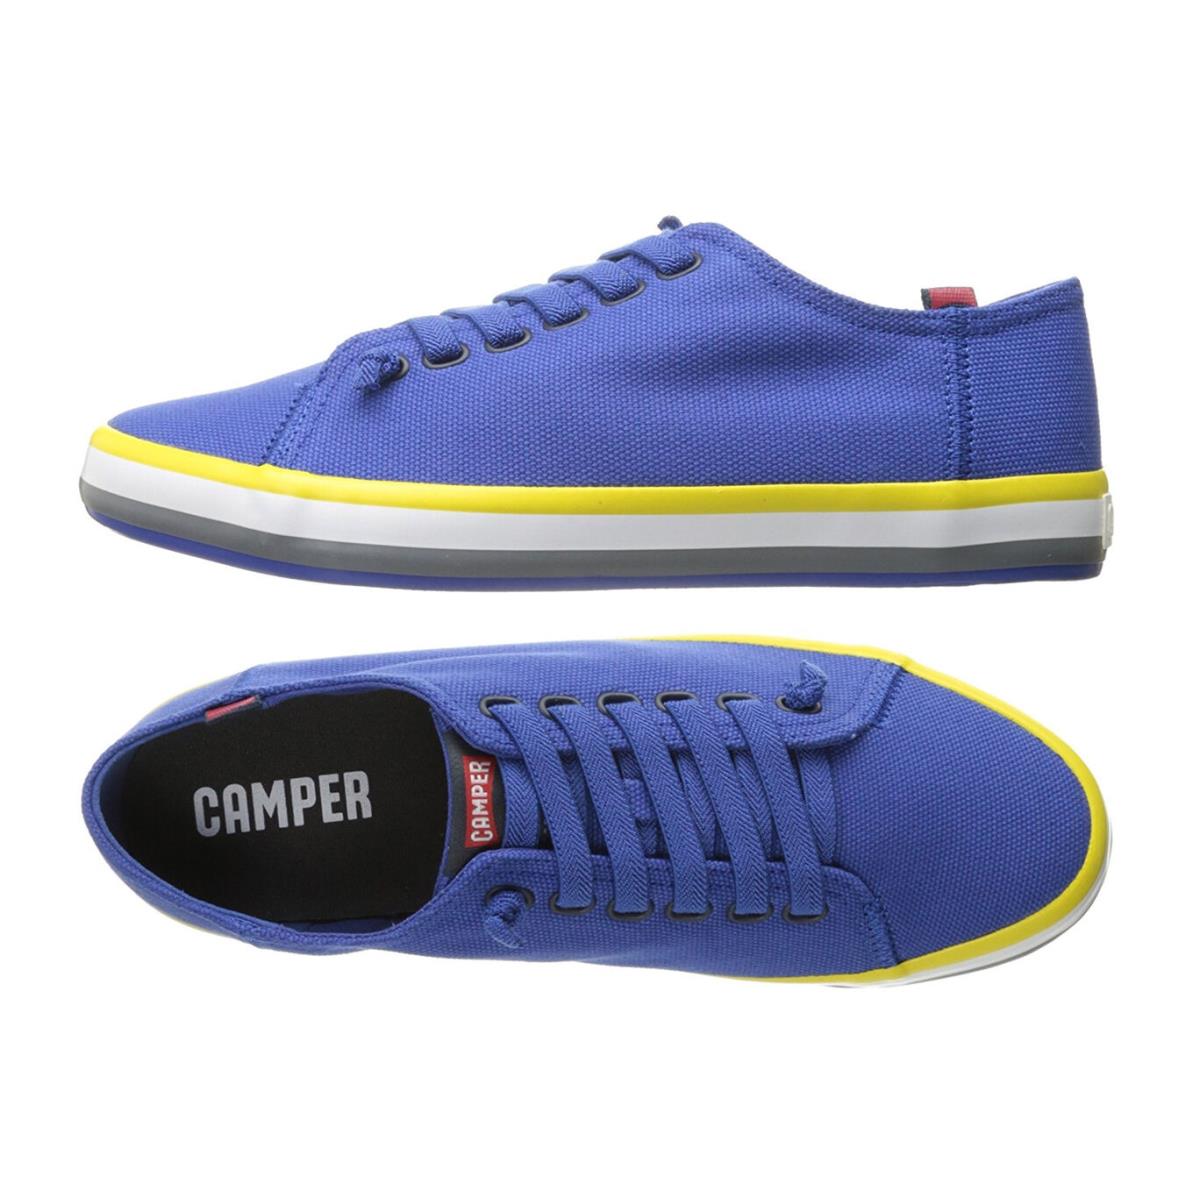 Camper Shoes Mens Camper Andratx Blue Canvas Sneakers Trainer Shoes